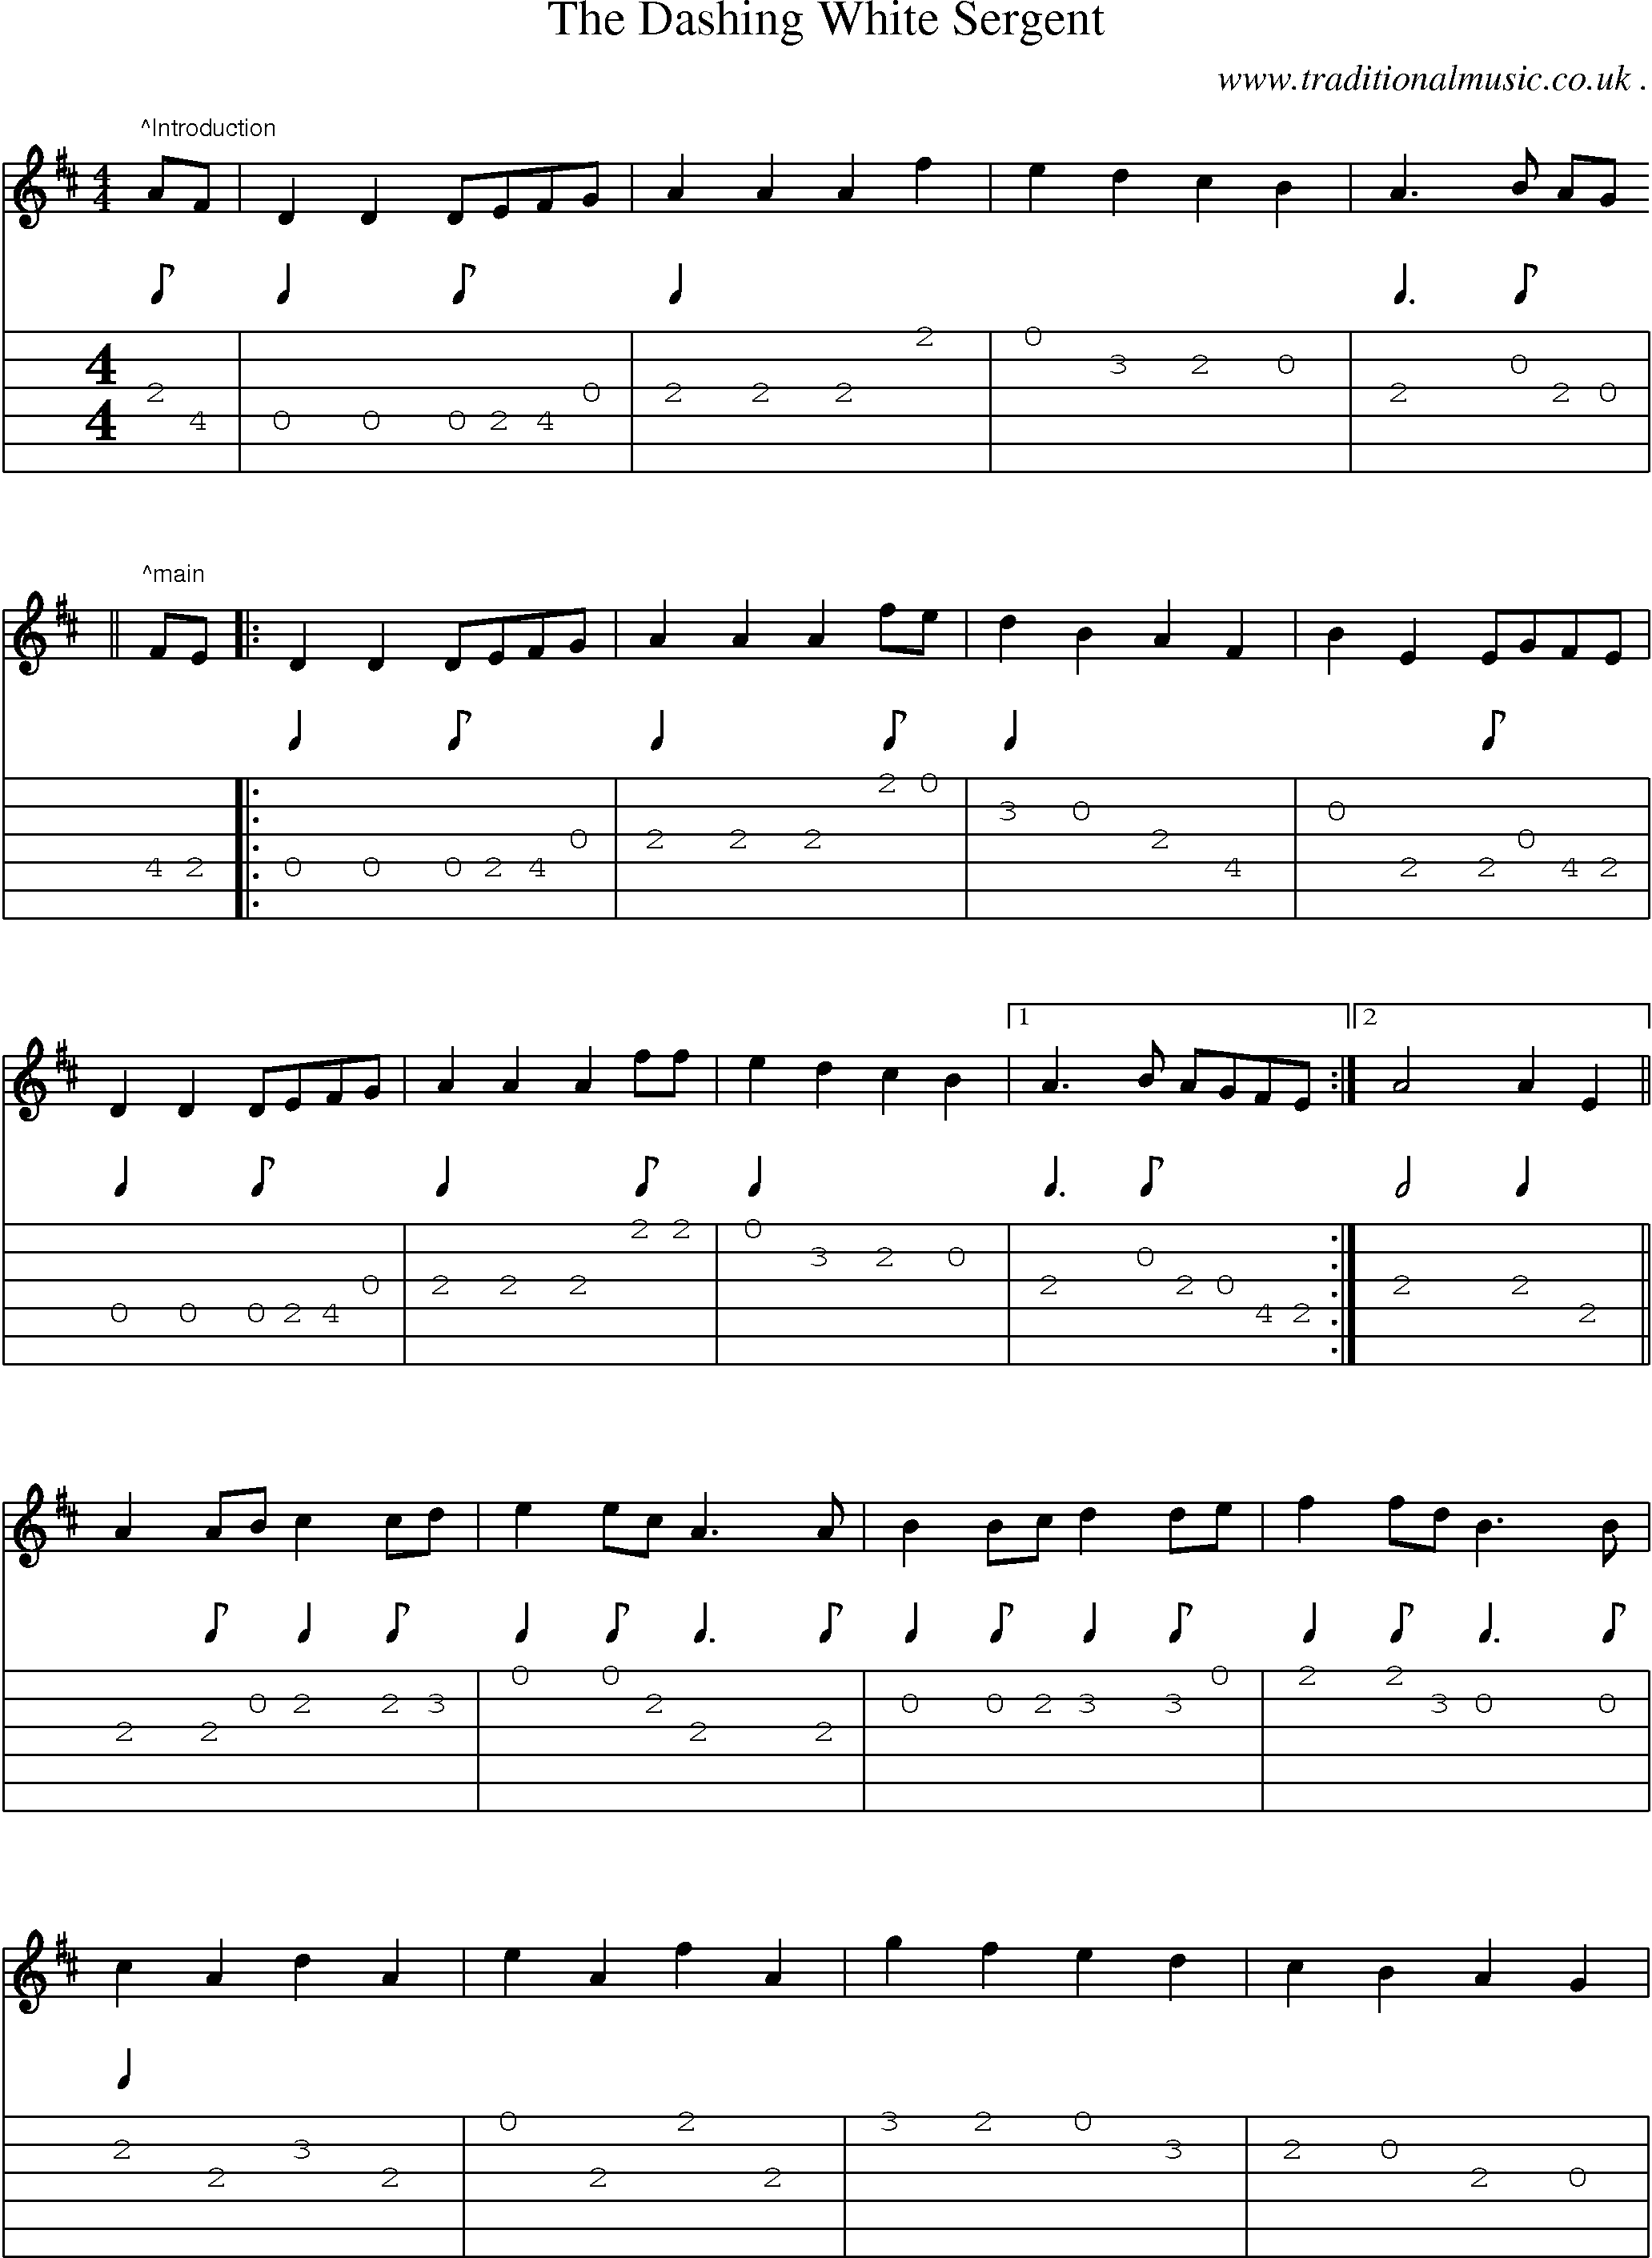 Sheet-Music and Guitar Tabs for The Dashing White Sergent